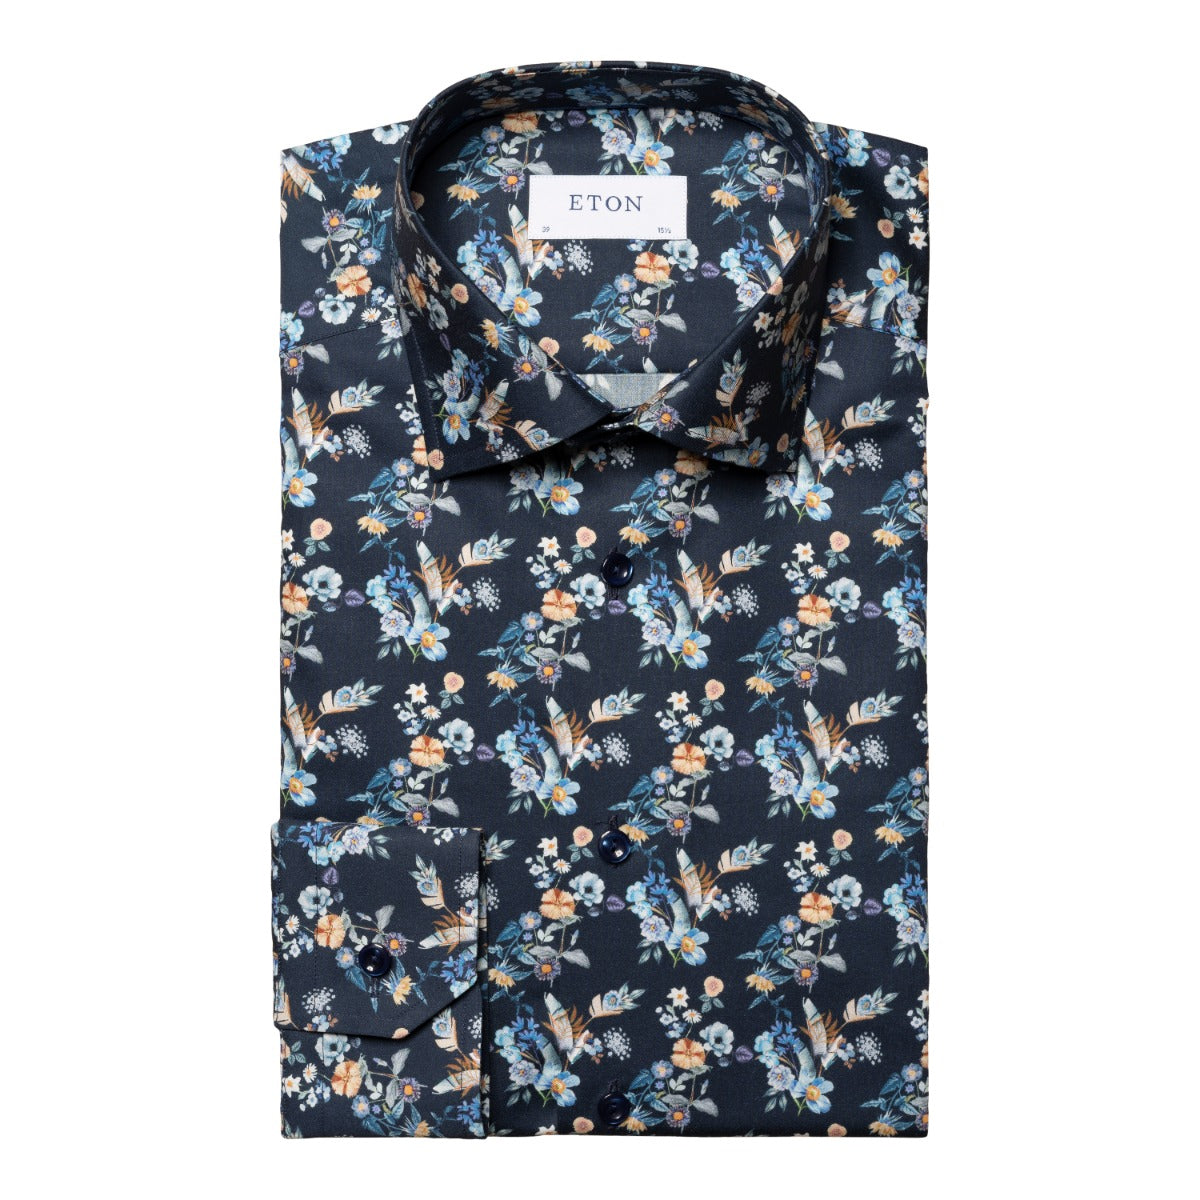 Navy Blue Floral Print Contemporary Fit Twill Shirt  Eton   